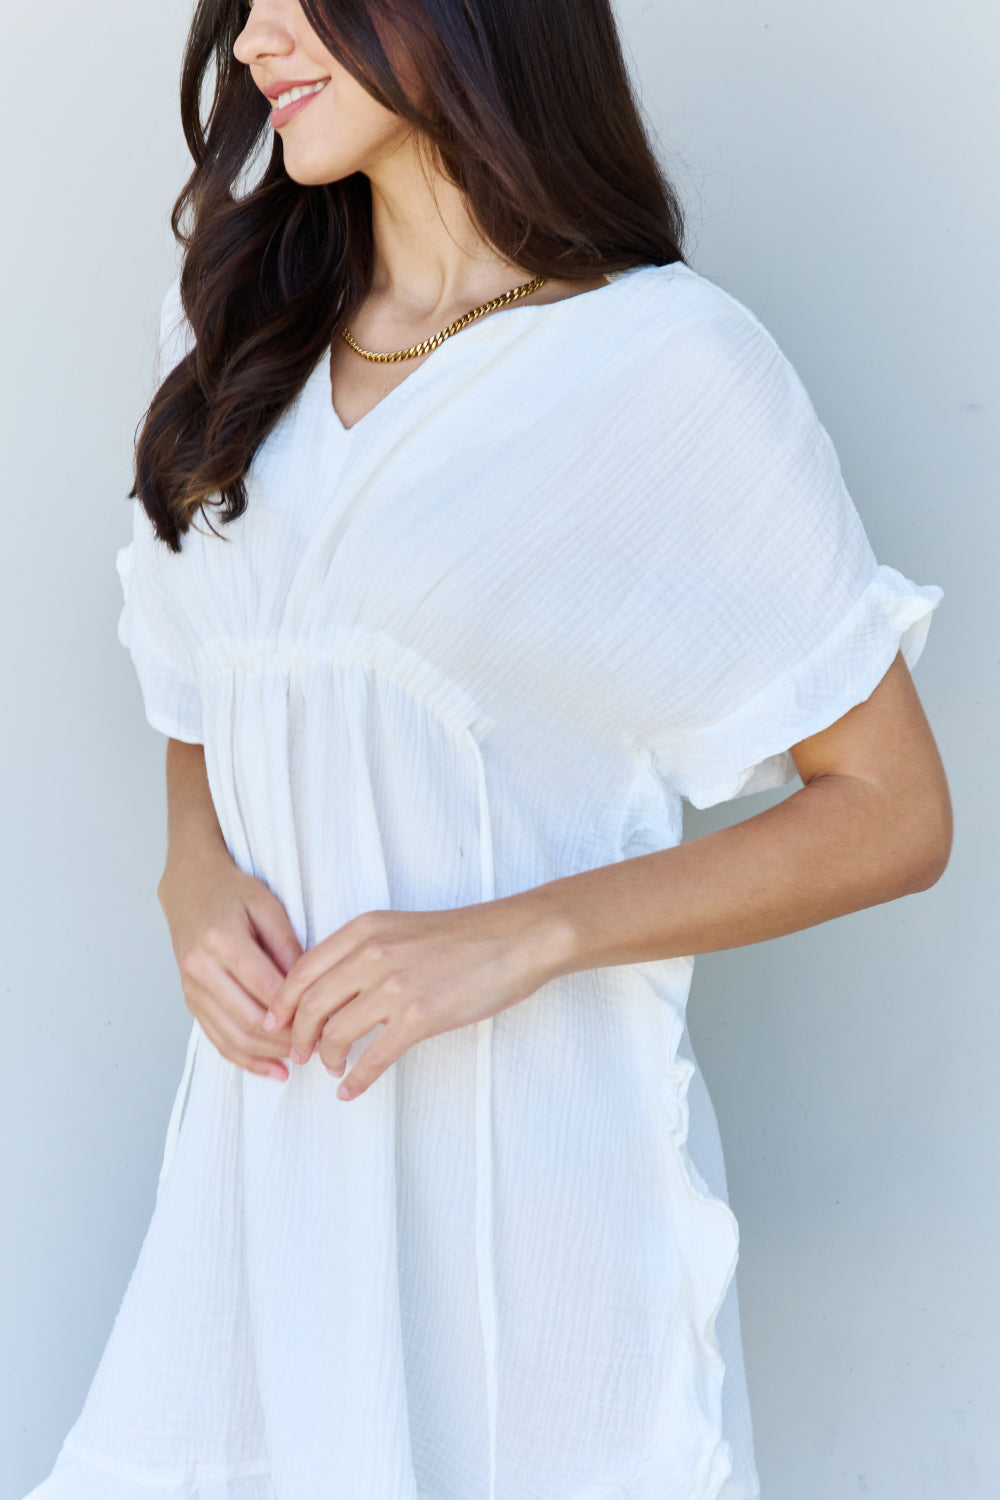 Out Of Time Full Size Ruffle Hem Dress with Drawstring Waistband in White - All Dresses - Dresses - 5 - 2024